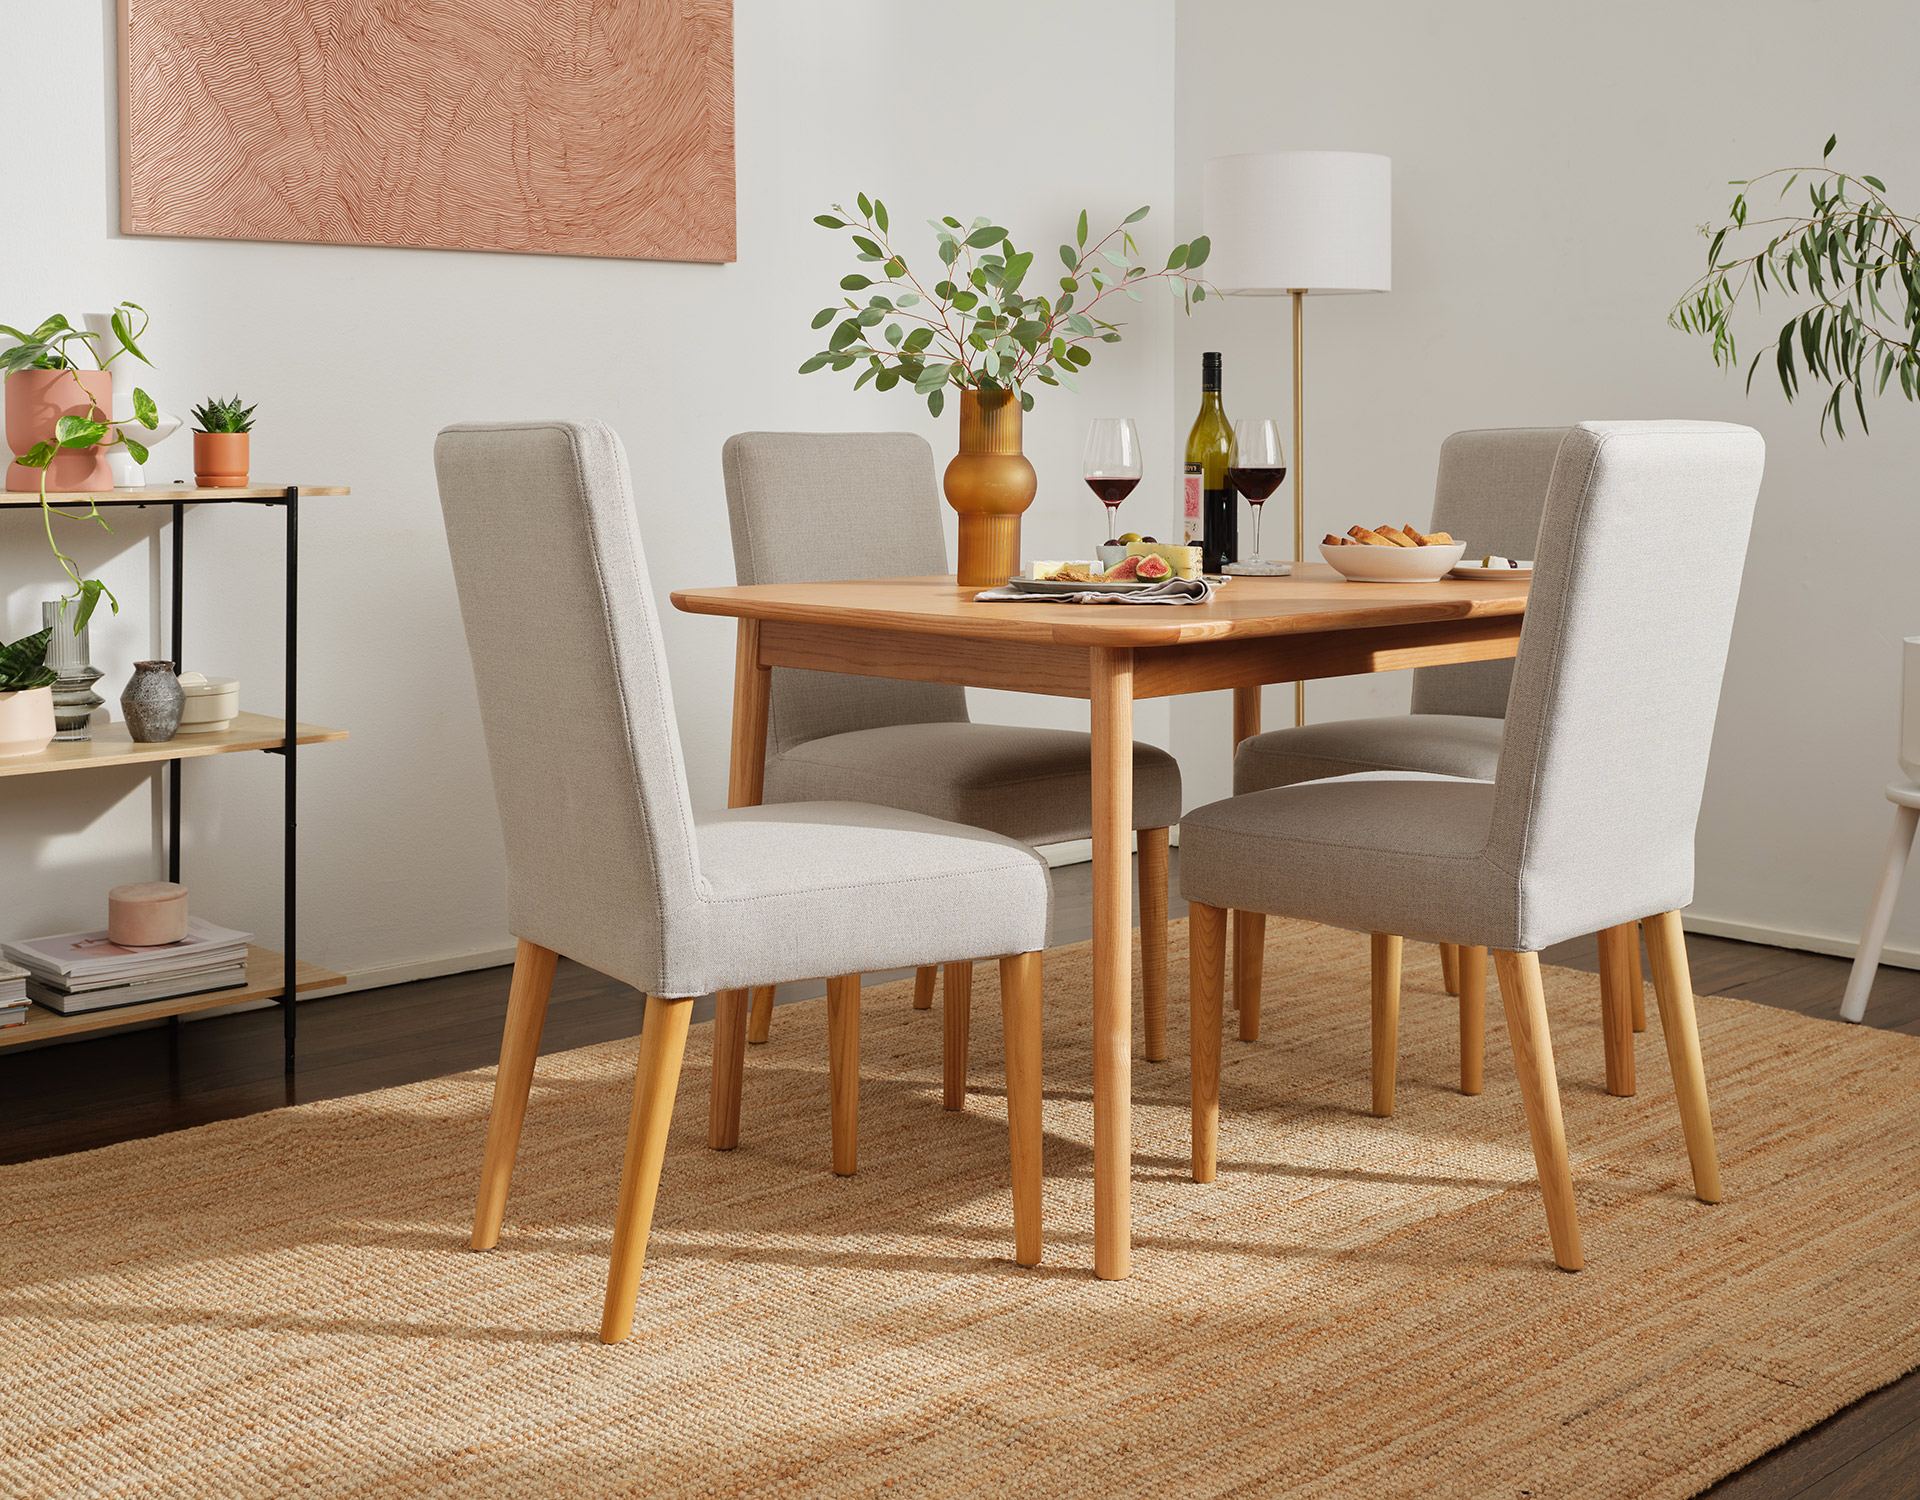 The Koala Serenity Dining Table in a dining room with floor rug and dining chairs